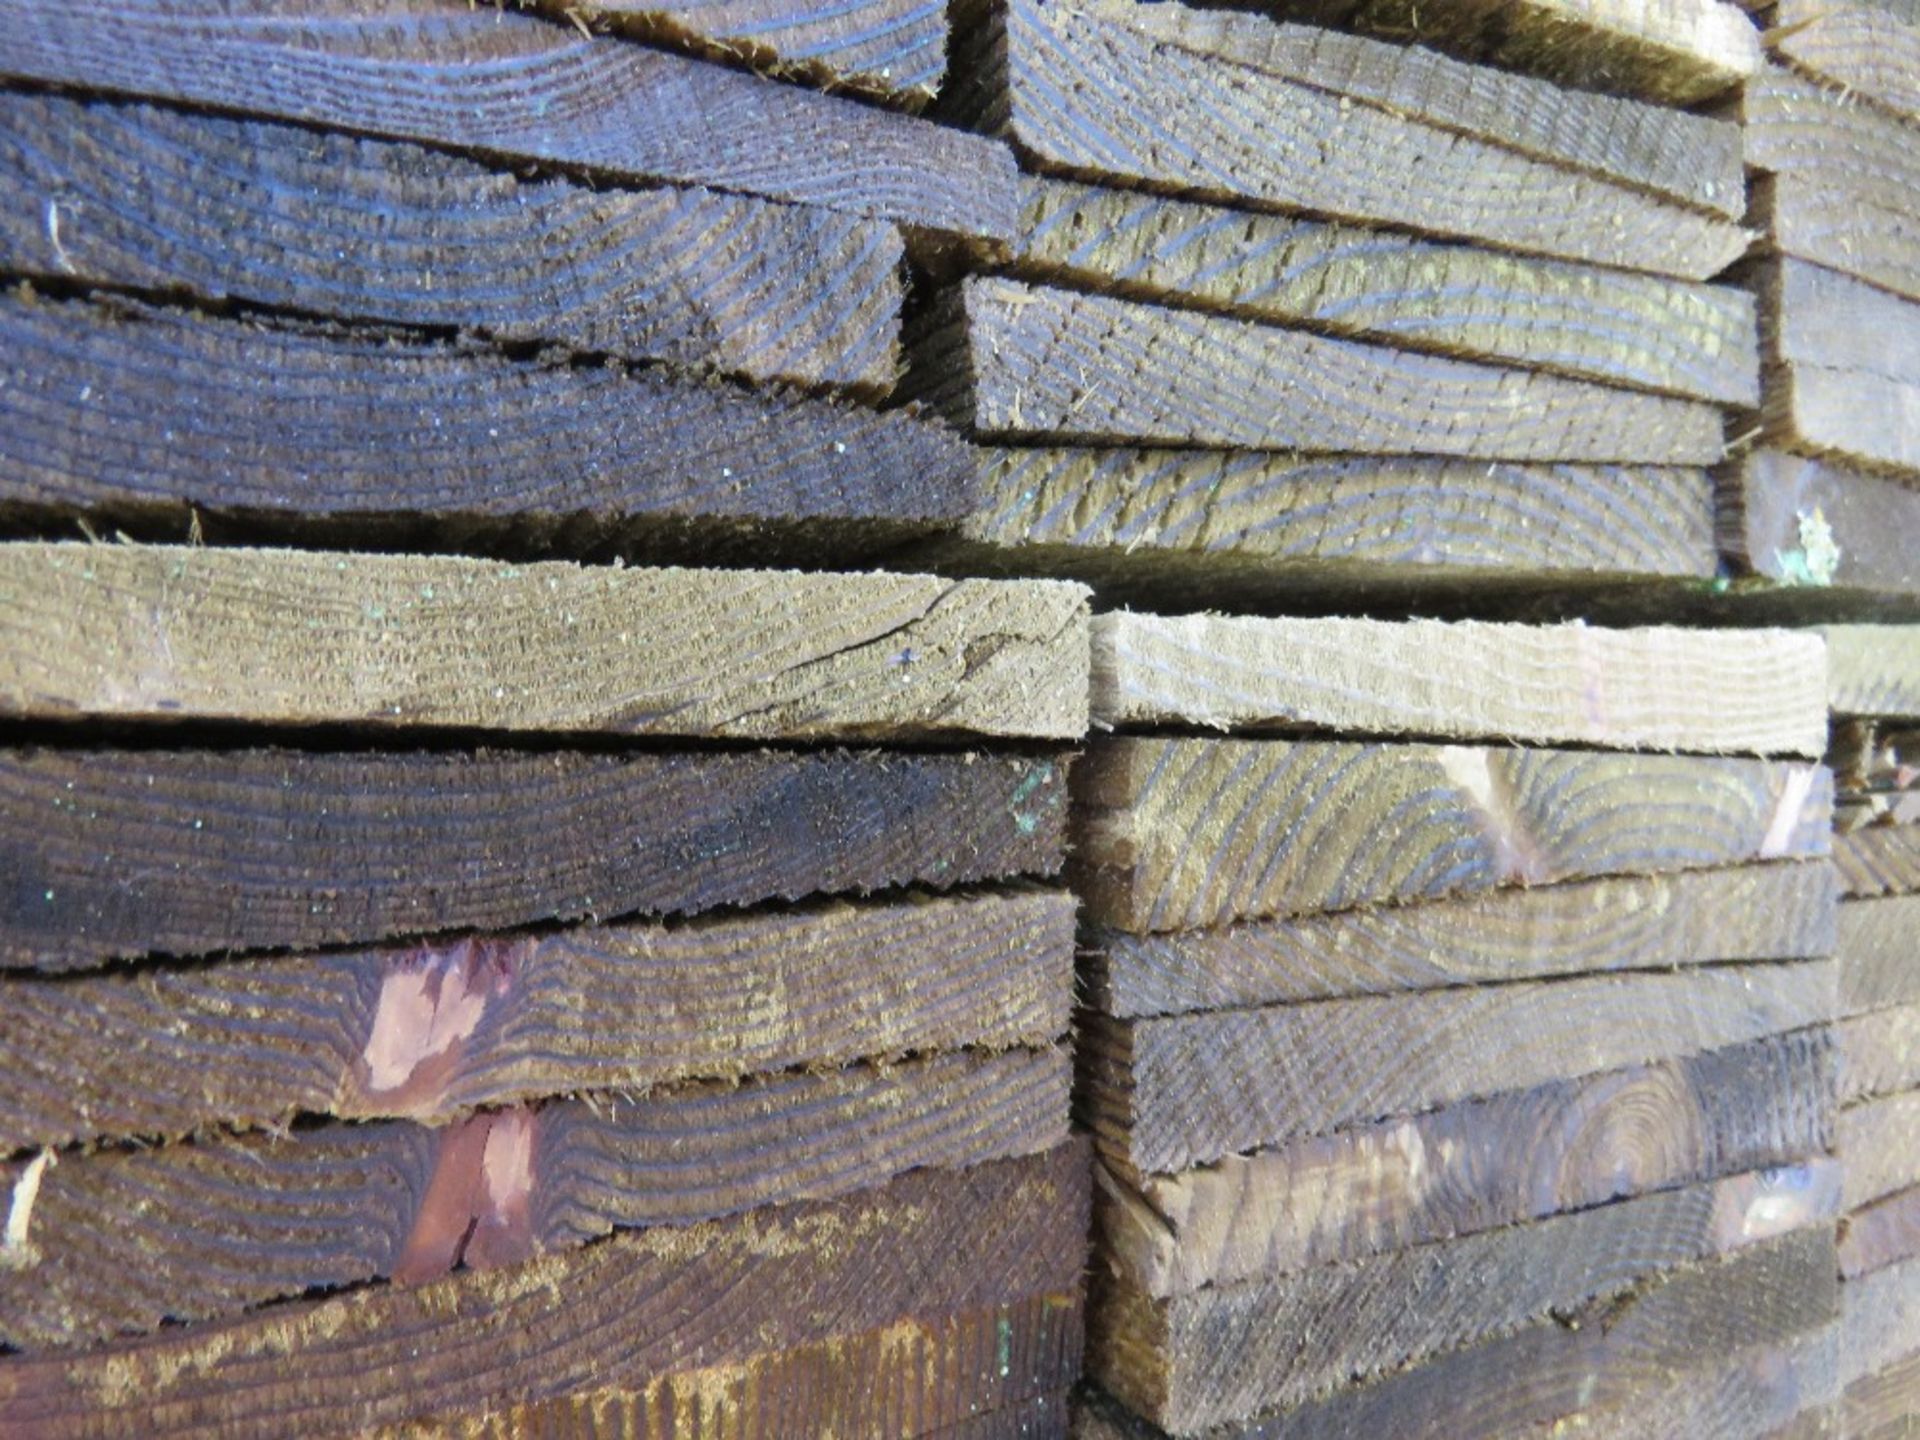 MEDIUM PACK OF PRESSURE TREATED FEATHER EDGE CLADDING TIMBER BOARDS 1.65M LENGTH X 100MM WIDTH APPRO - Image 3 of 3